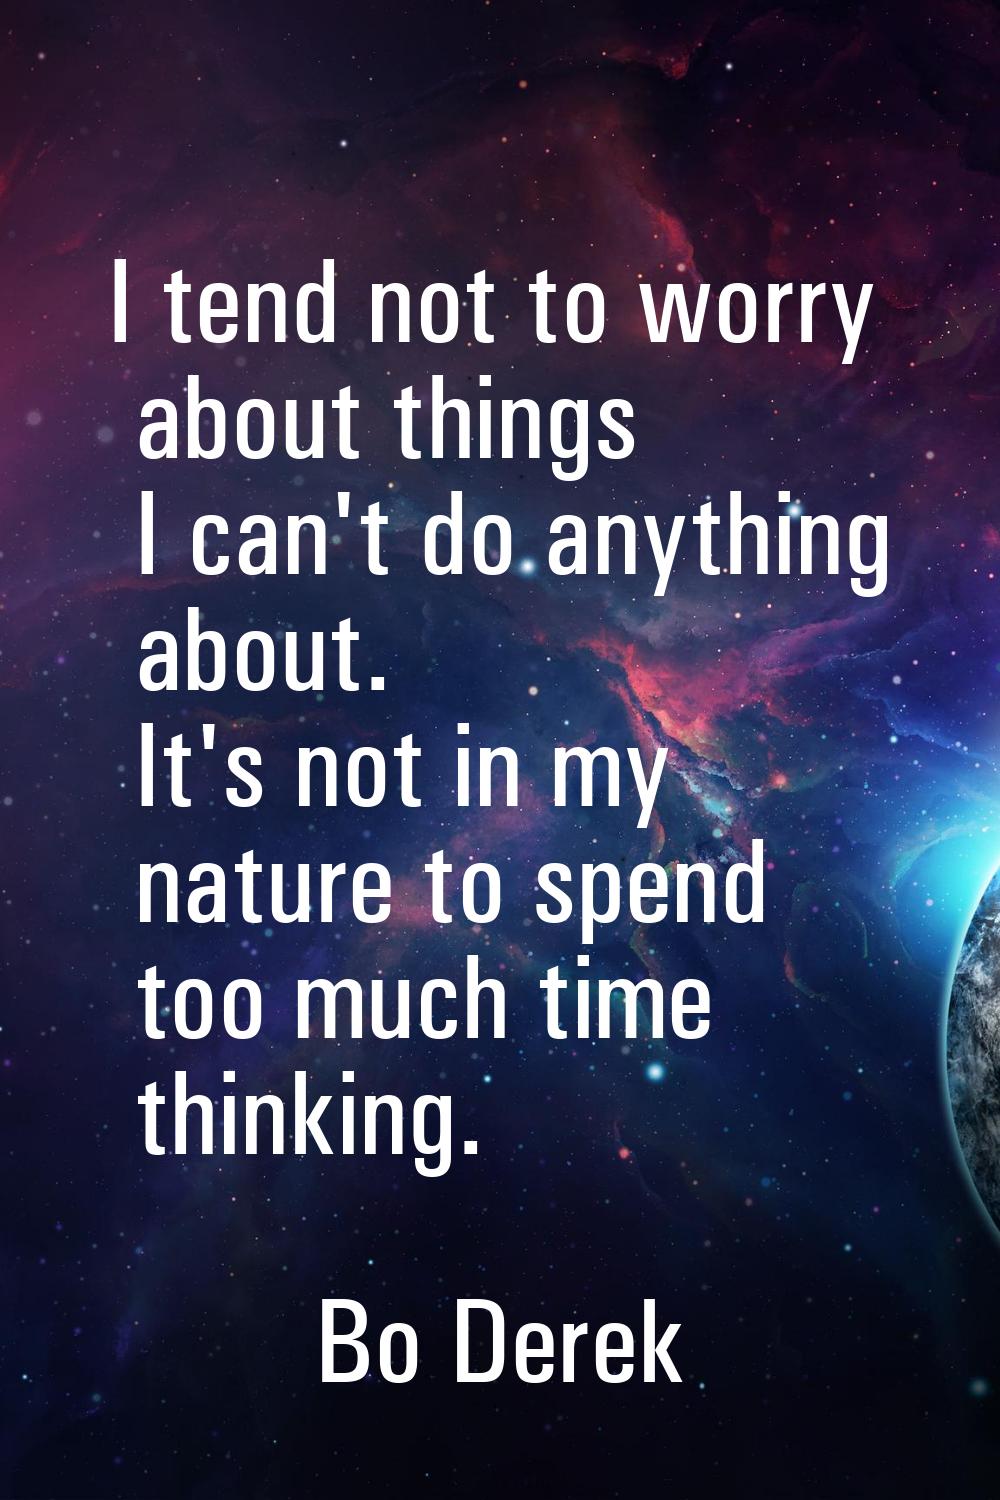 I tend not to worry about things I can't do anything about. It's not in my nature to spend too much